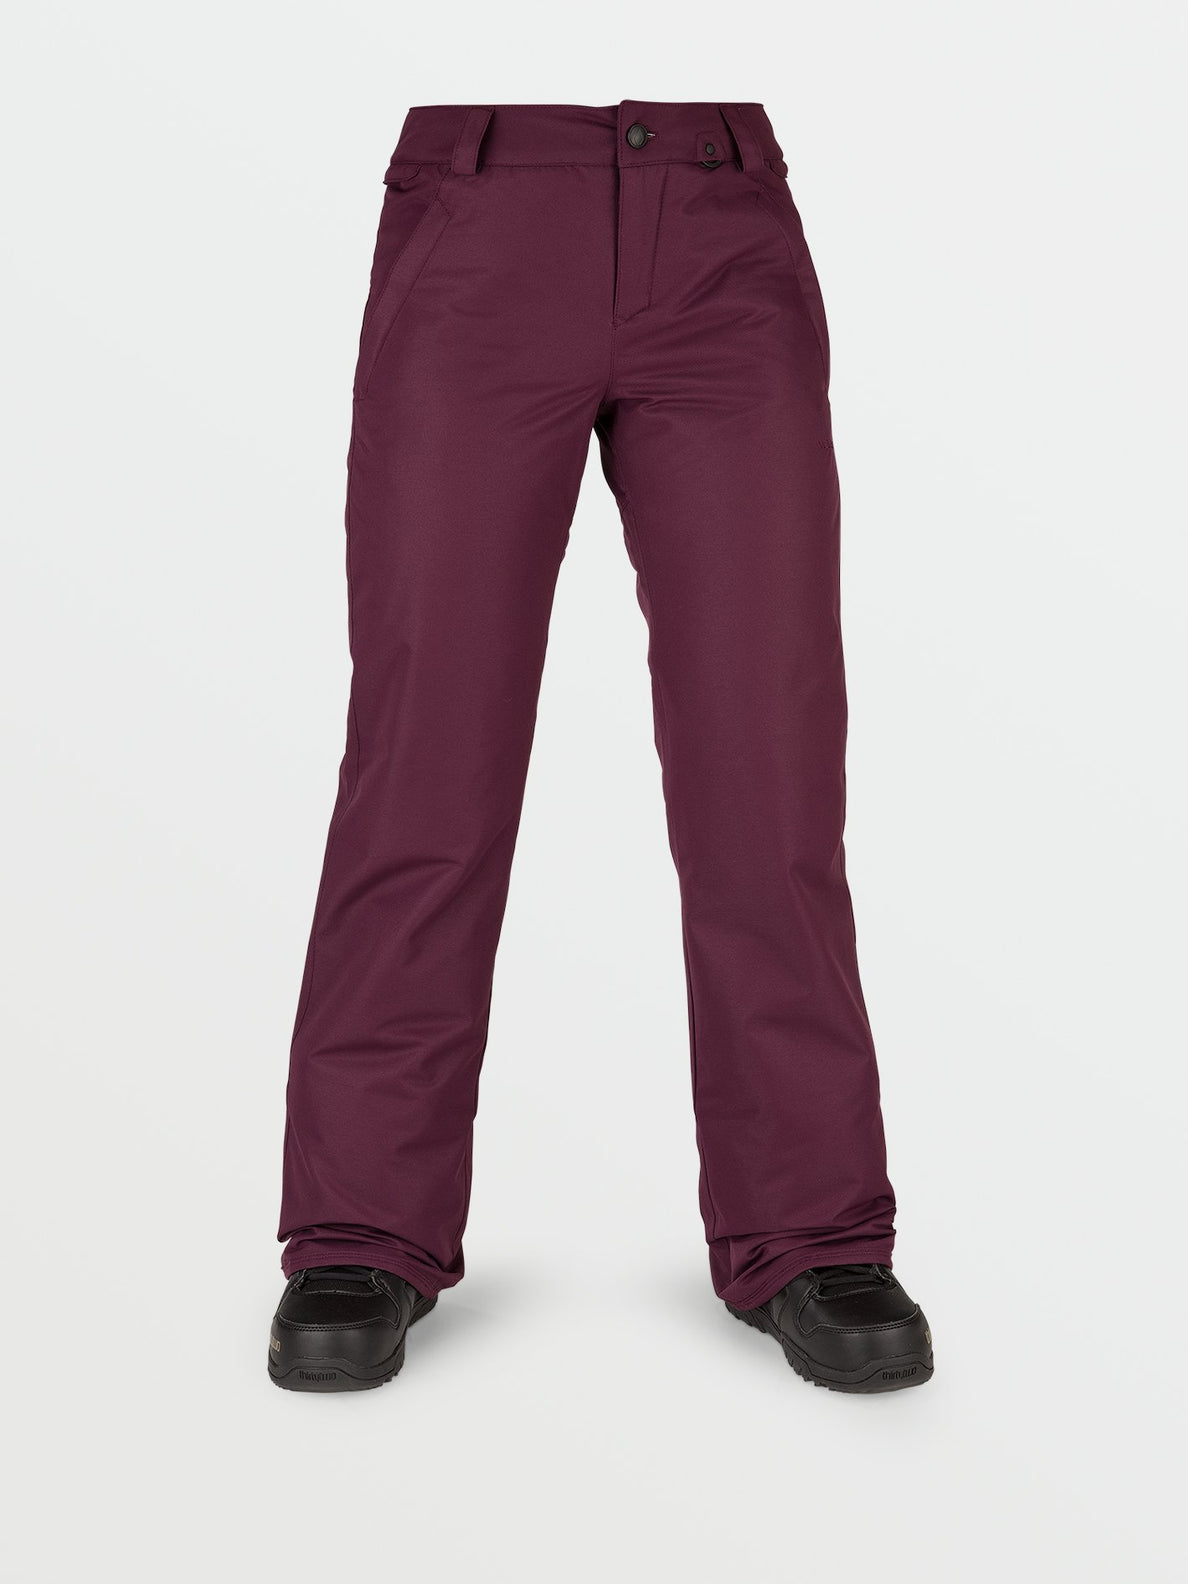 Frochickie Insulated Trousers - MERLOT (H1252203_MER) [F]